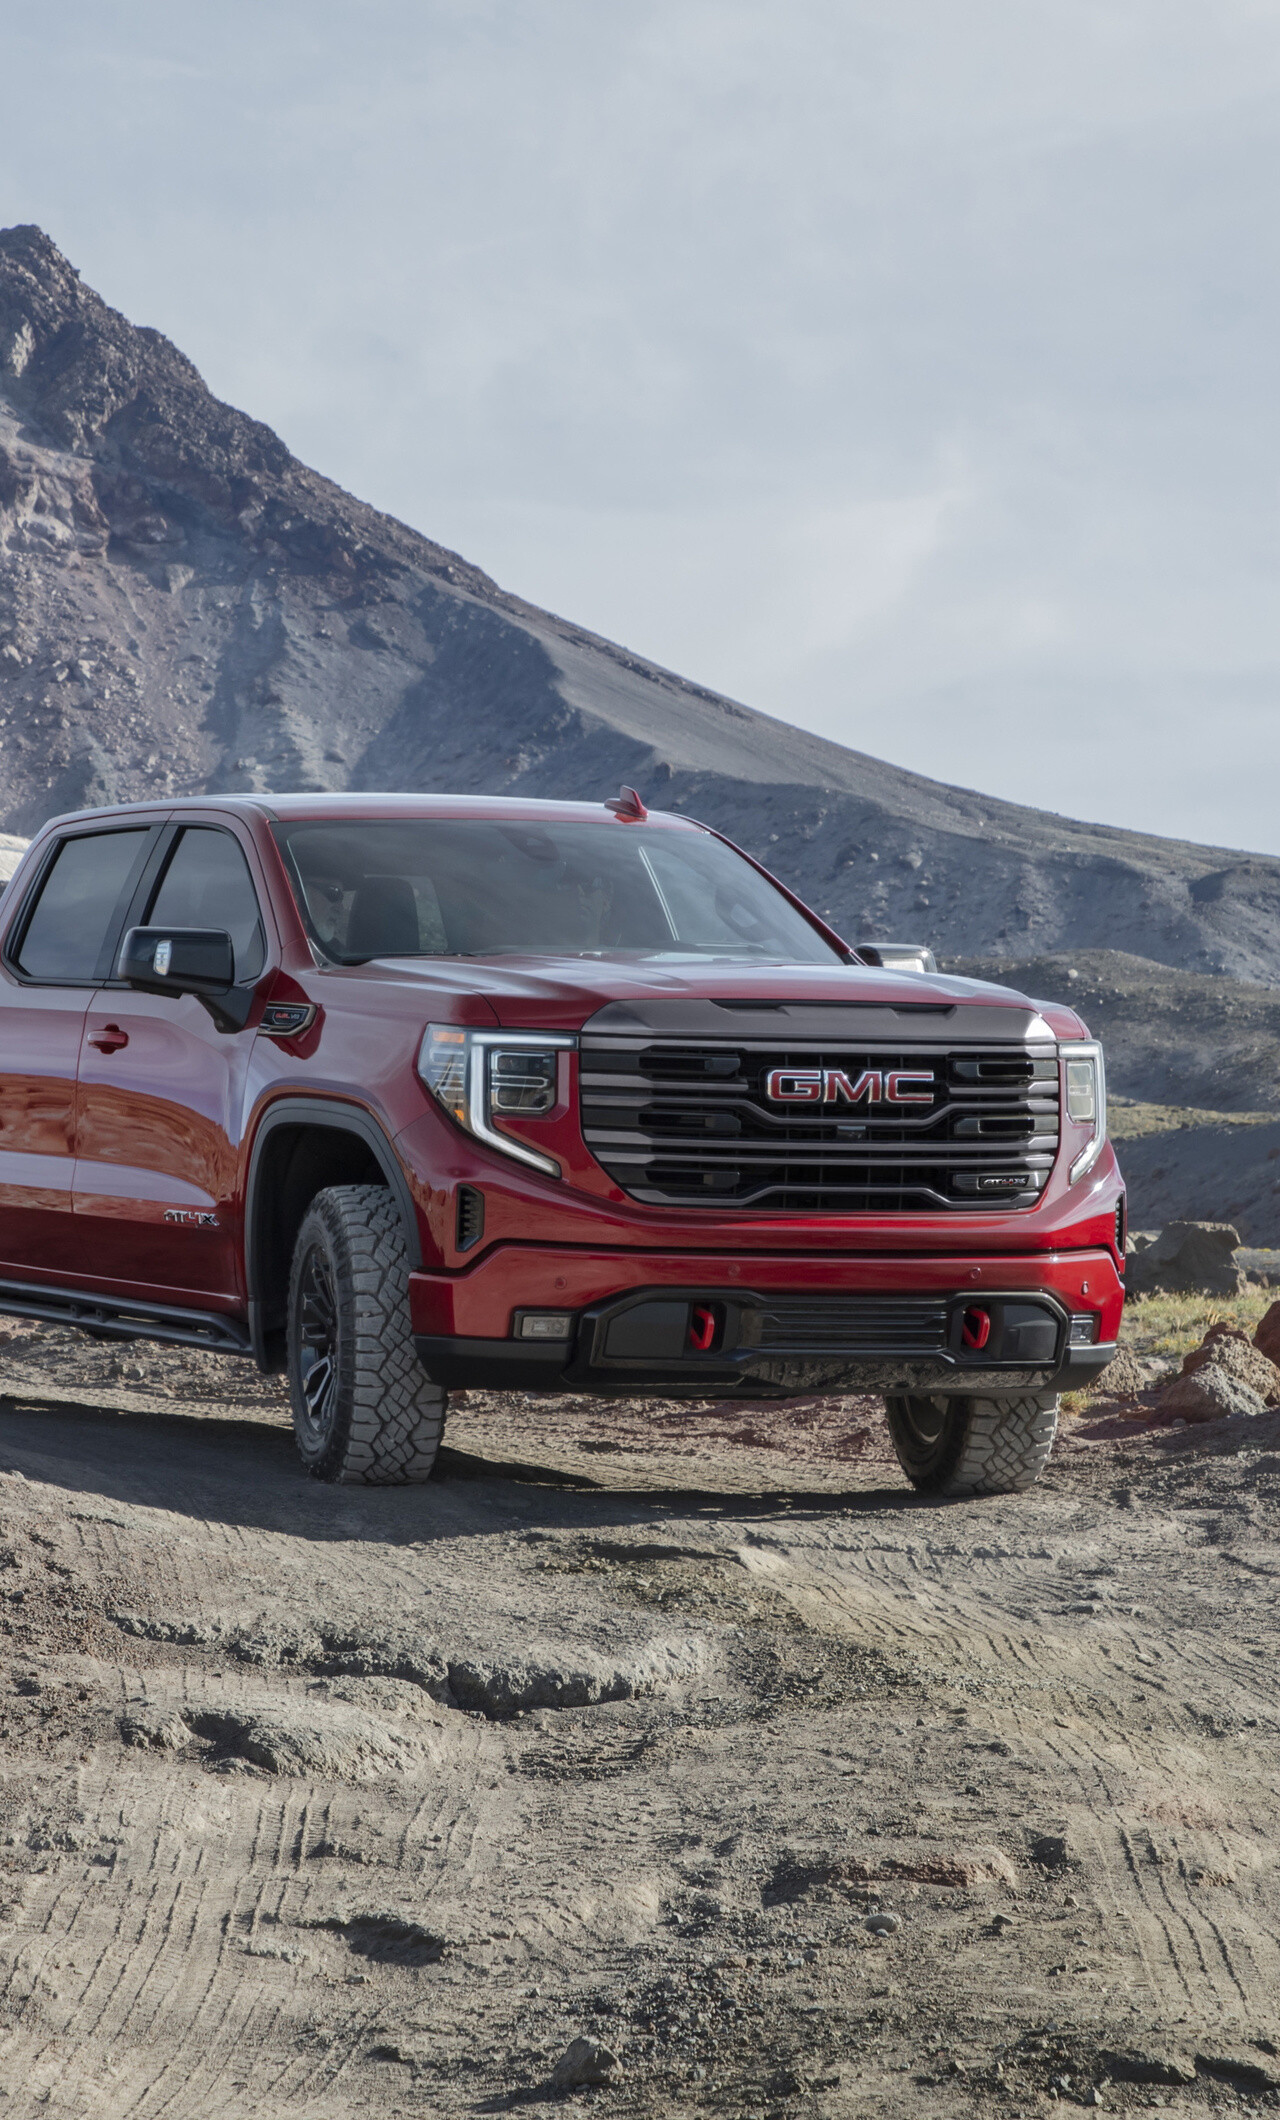 GMC: 2022 Sierra AT4X Crew Cab, Off-road capability, The truck ready for any adventure. 1280x2120 HD Wallpaper.